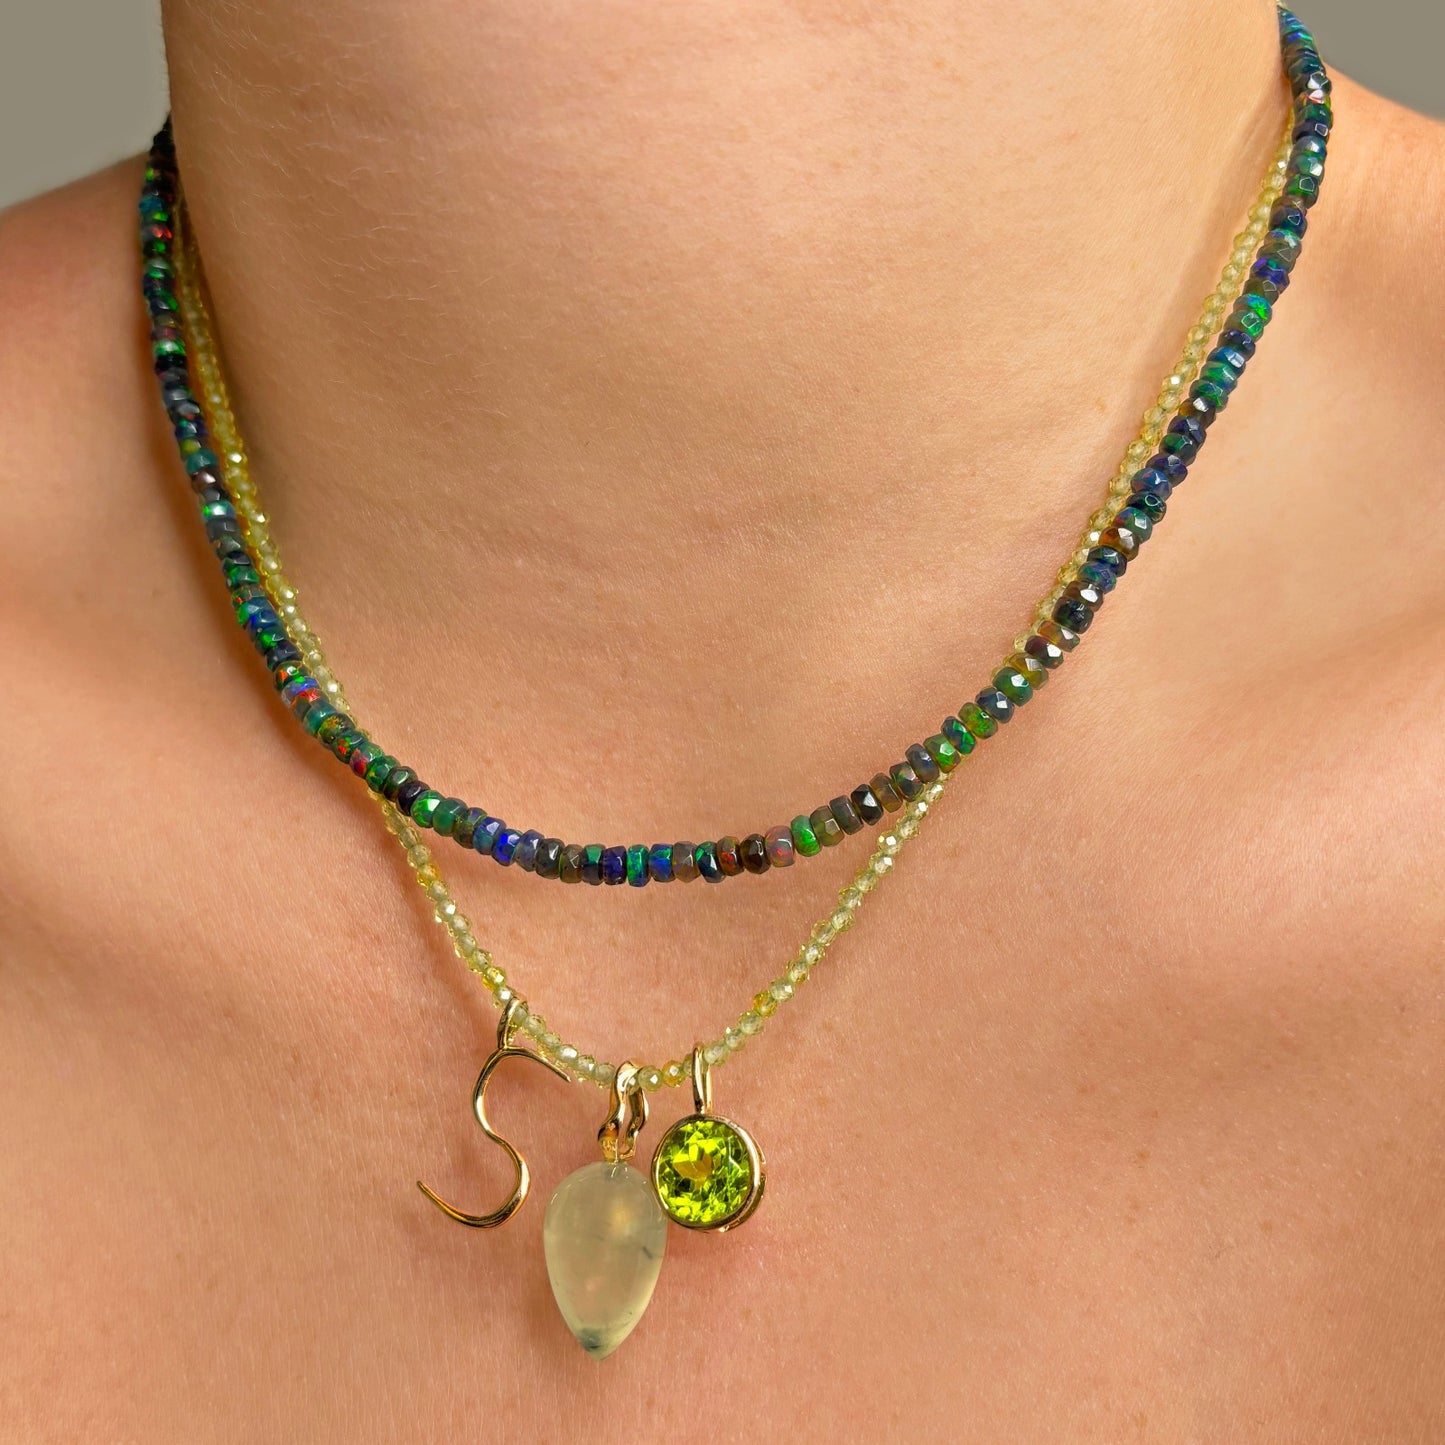 Shimmering beaded necklace made of 2mm faceted opals in shades of light green on a gold linking lobster clasp. Styled on a neck layered with an S letter charm, acorn drop charm, and round solitaire charm.